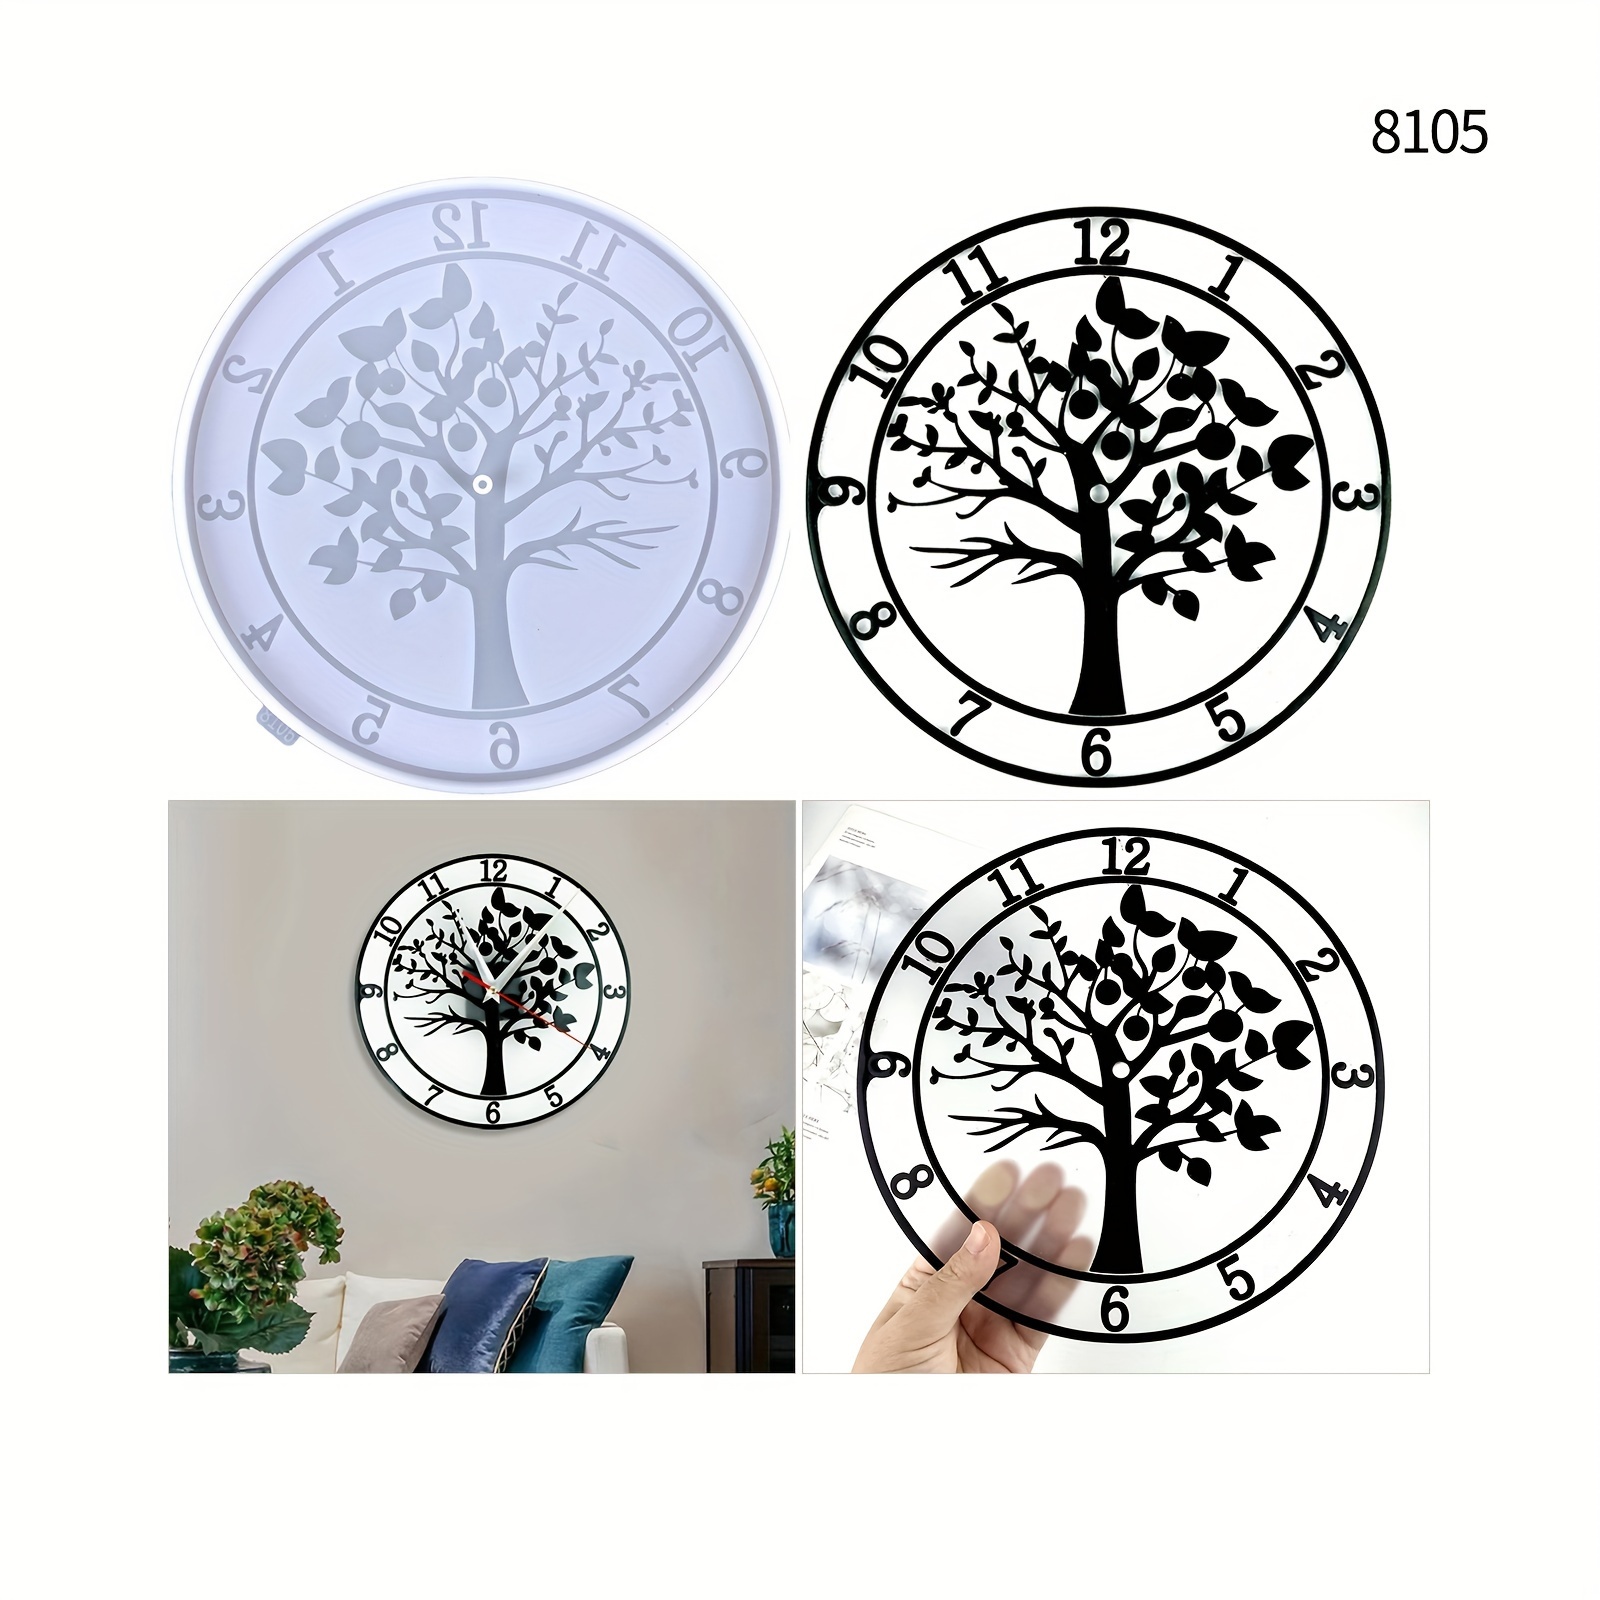 

Life Tree Wall Clock Silicone Mold - Round Resin Casting Mold For Diy Circular Dial Wall Decor